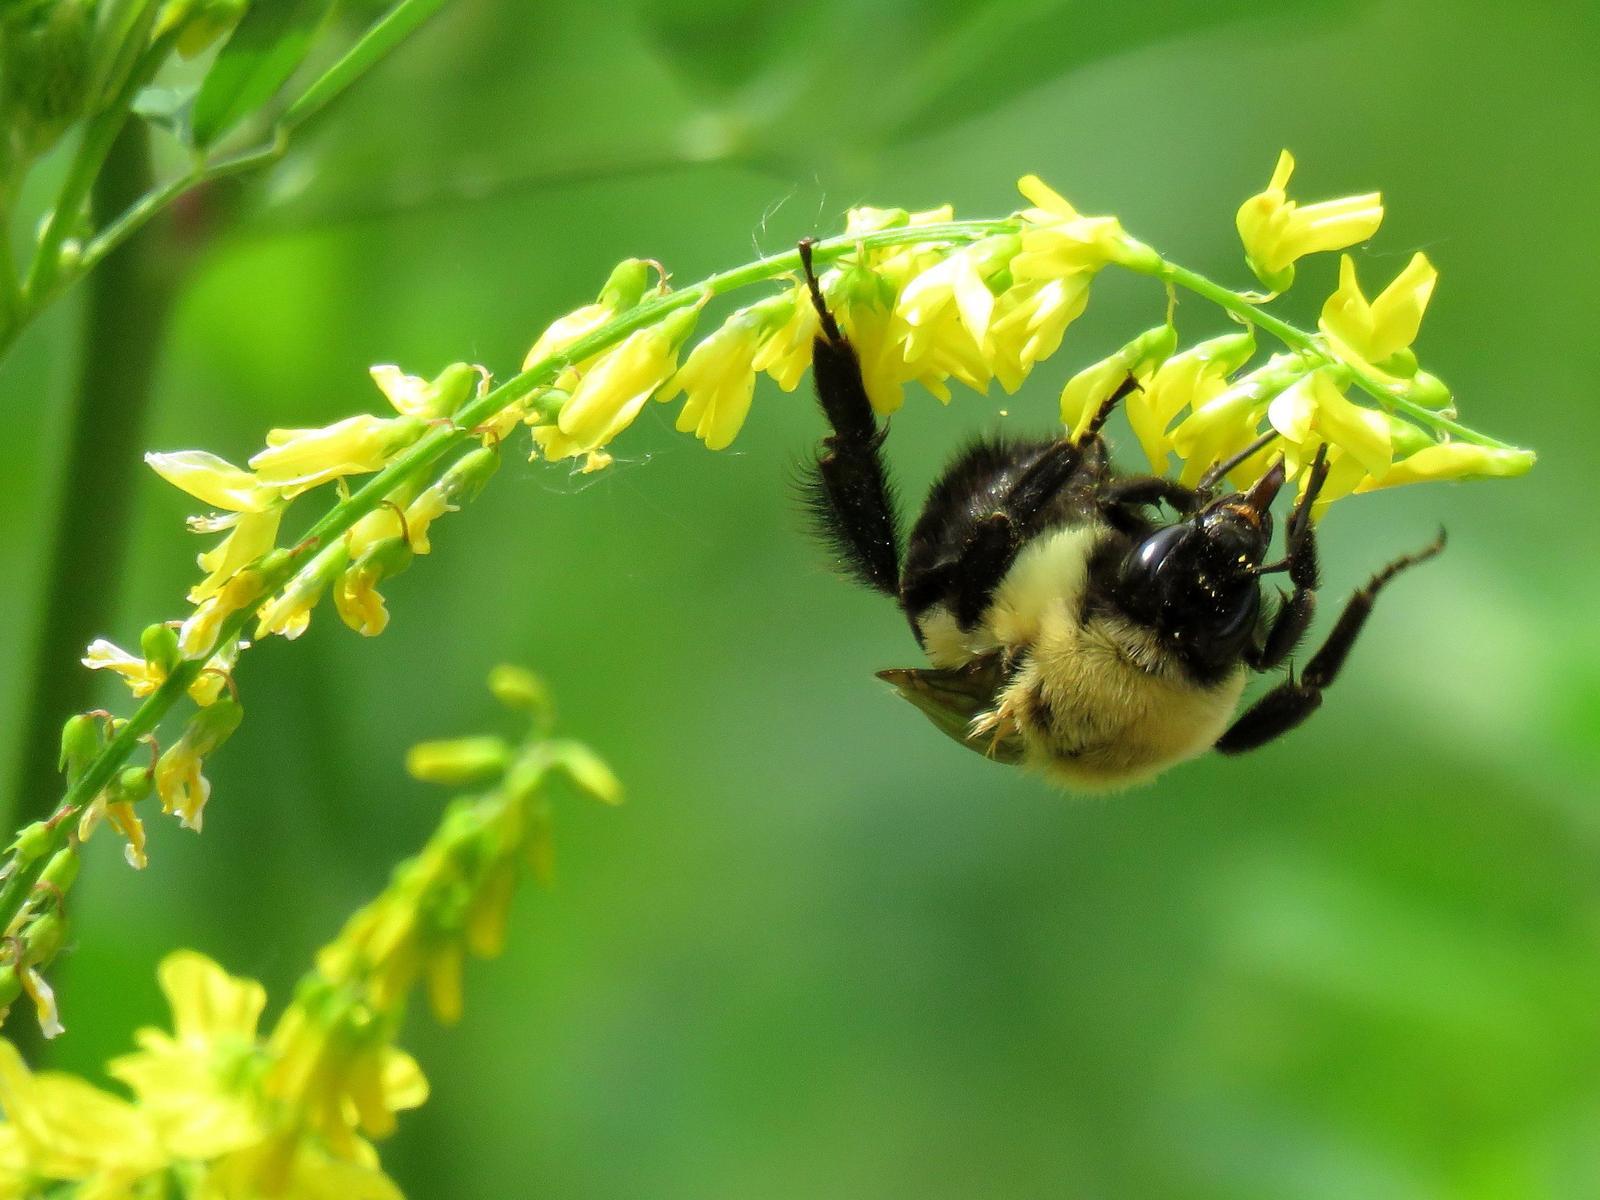 Common eastern bumble bee Photo by Kent Jensen